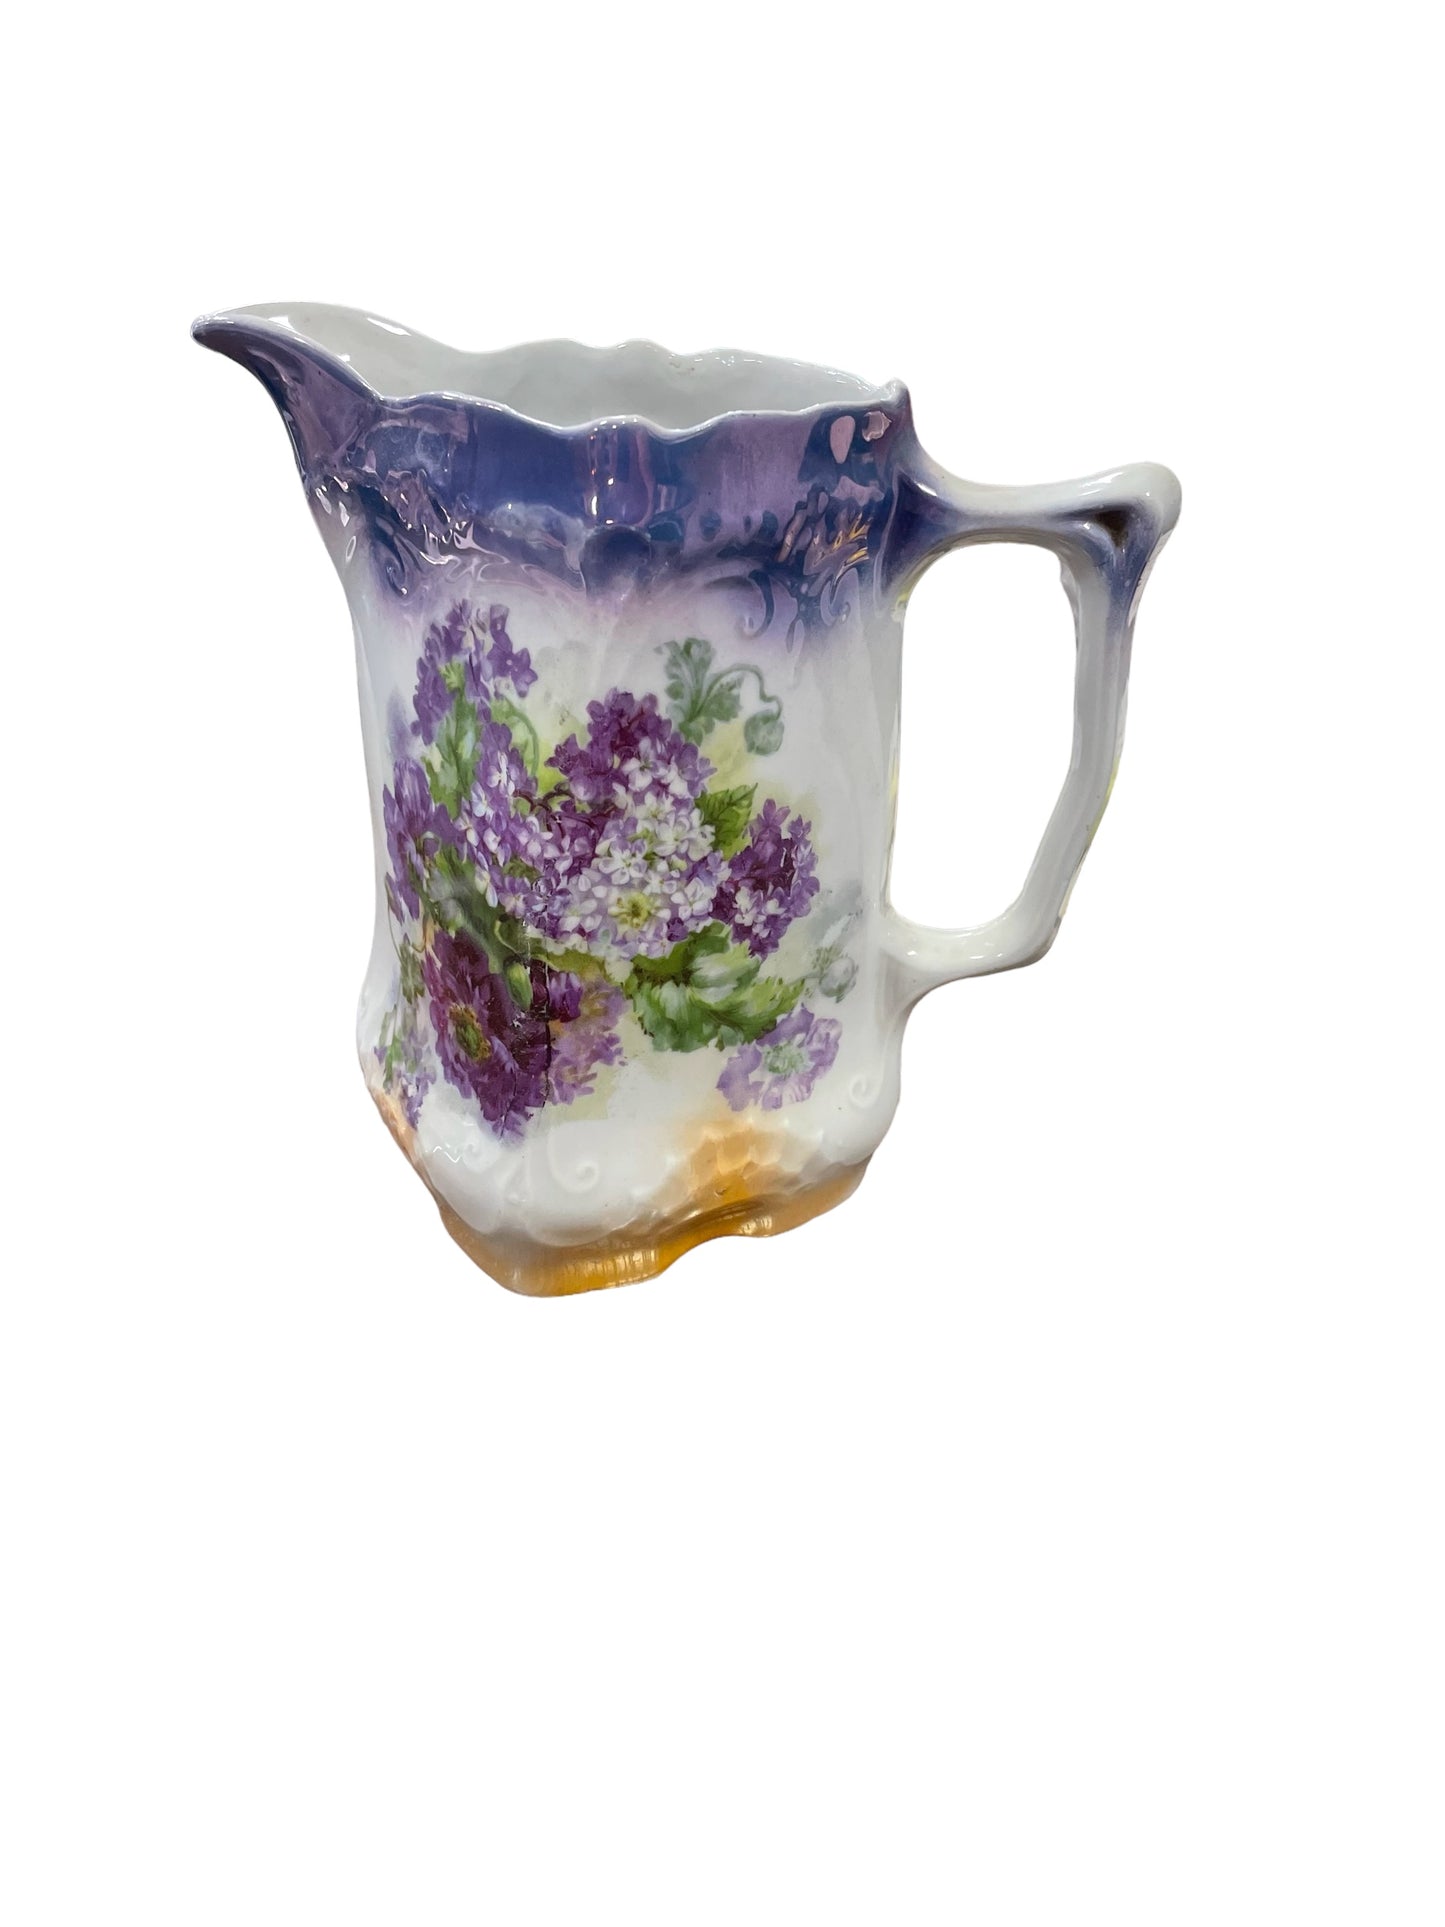 Hand painted porcelain pitcher